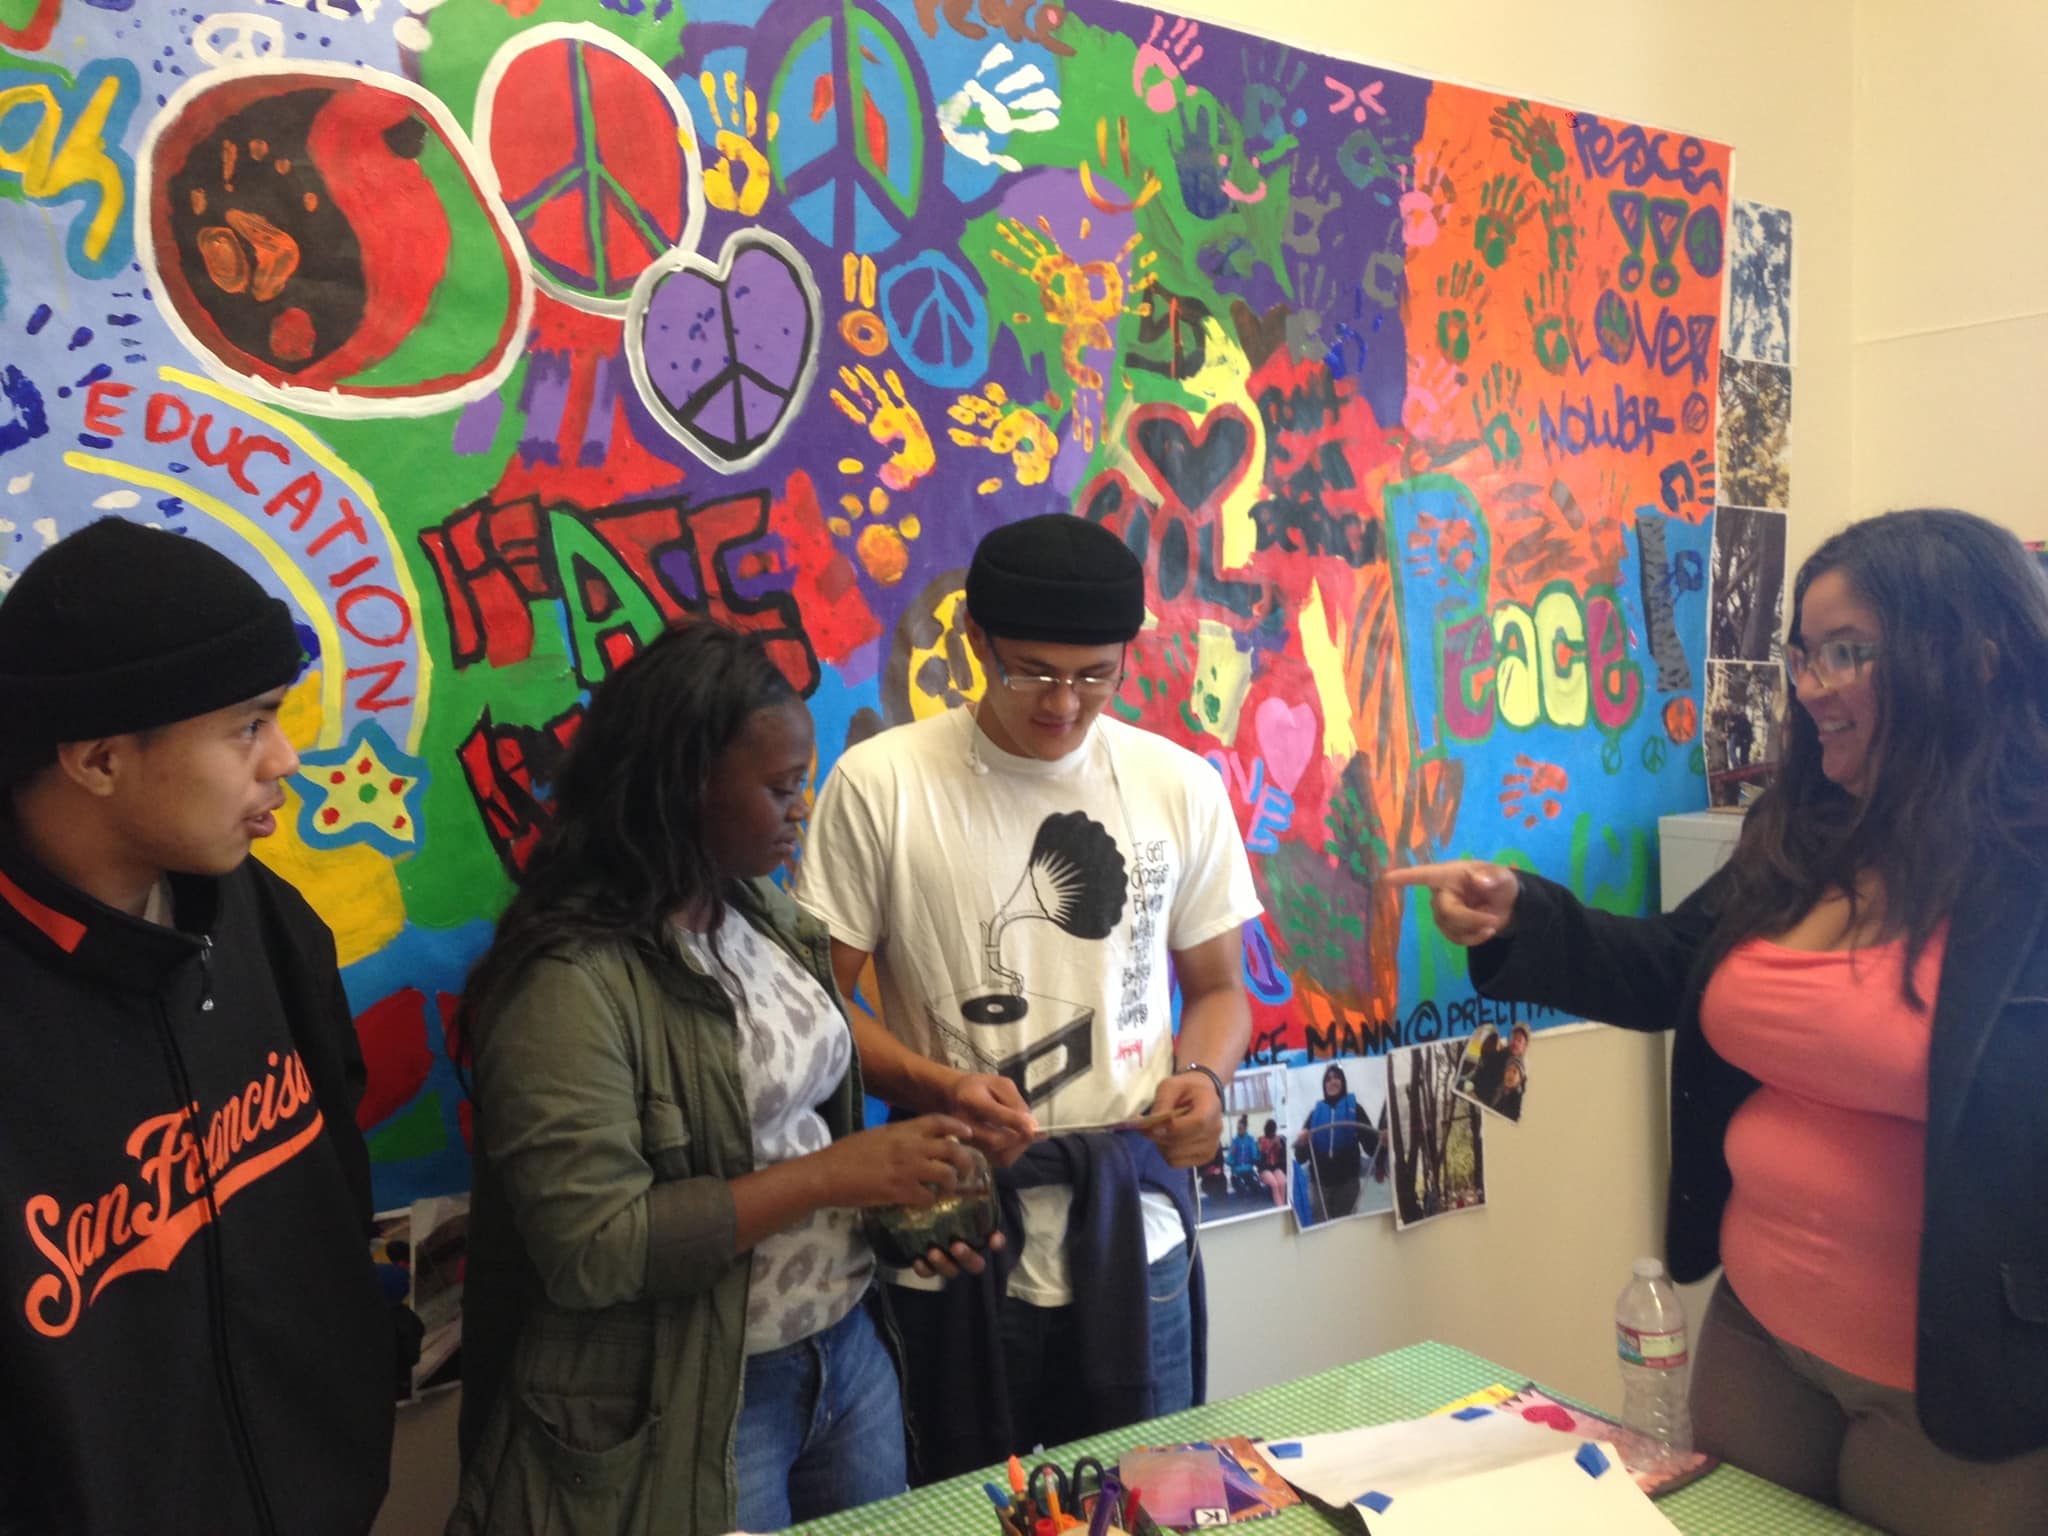 students talk to each other in front of a colorful mural